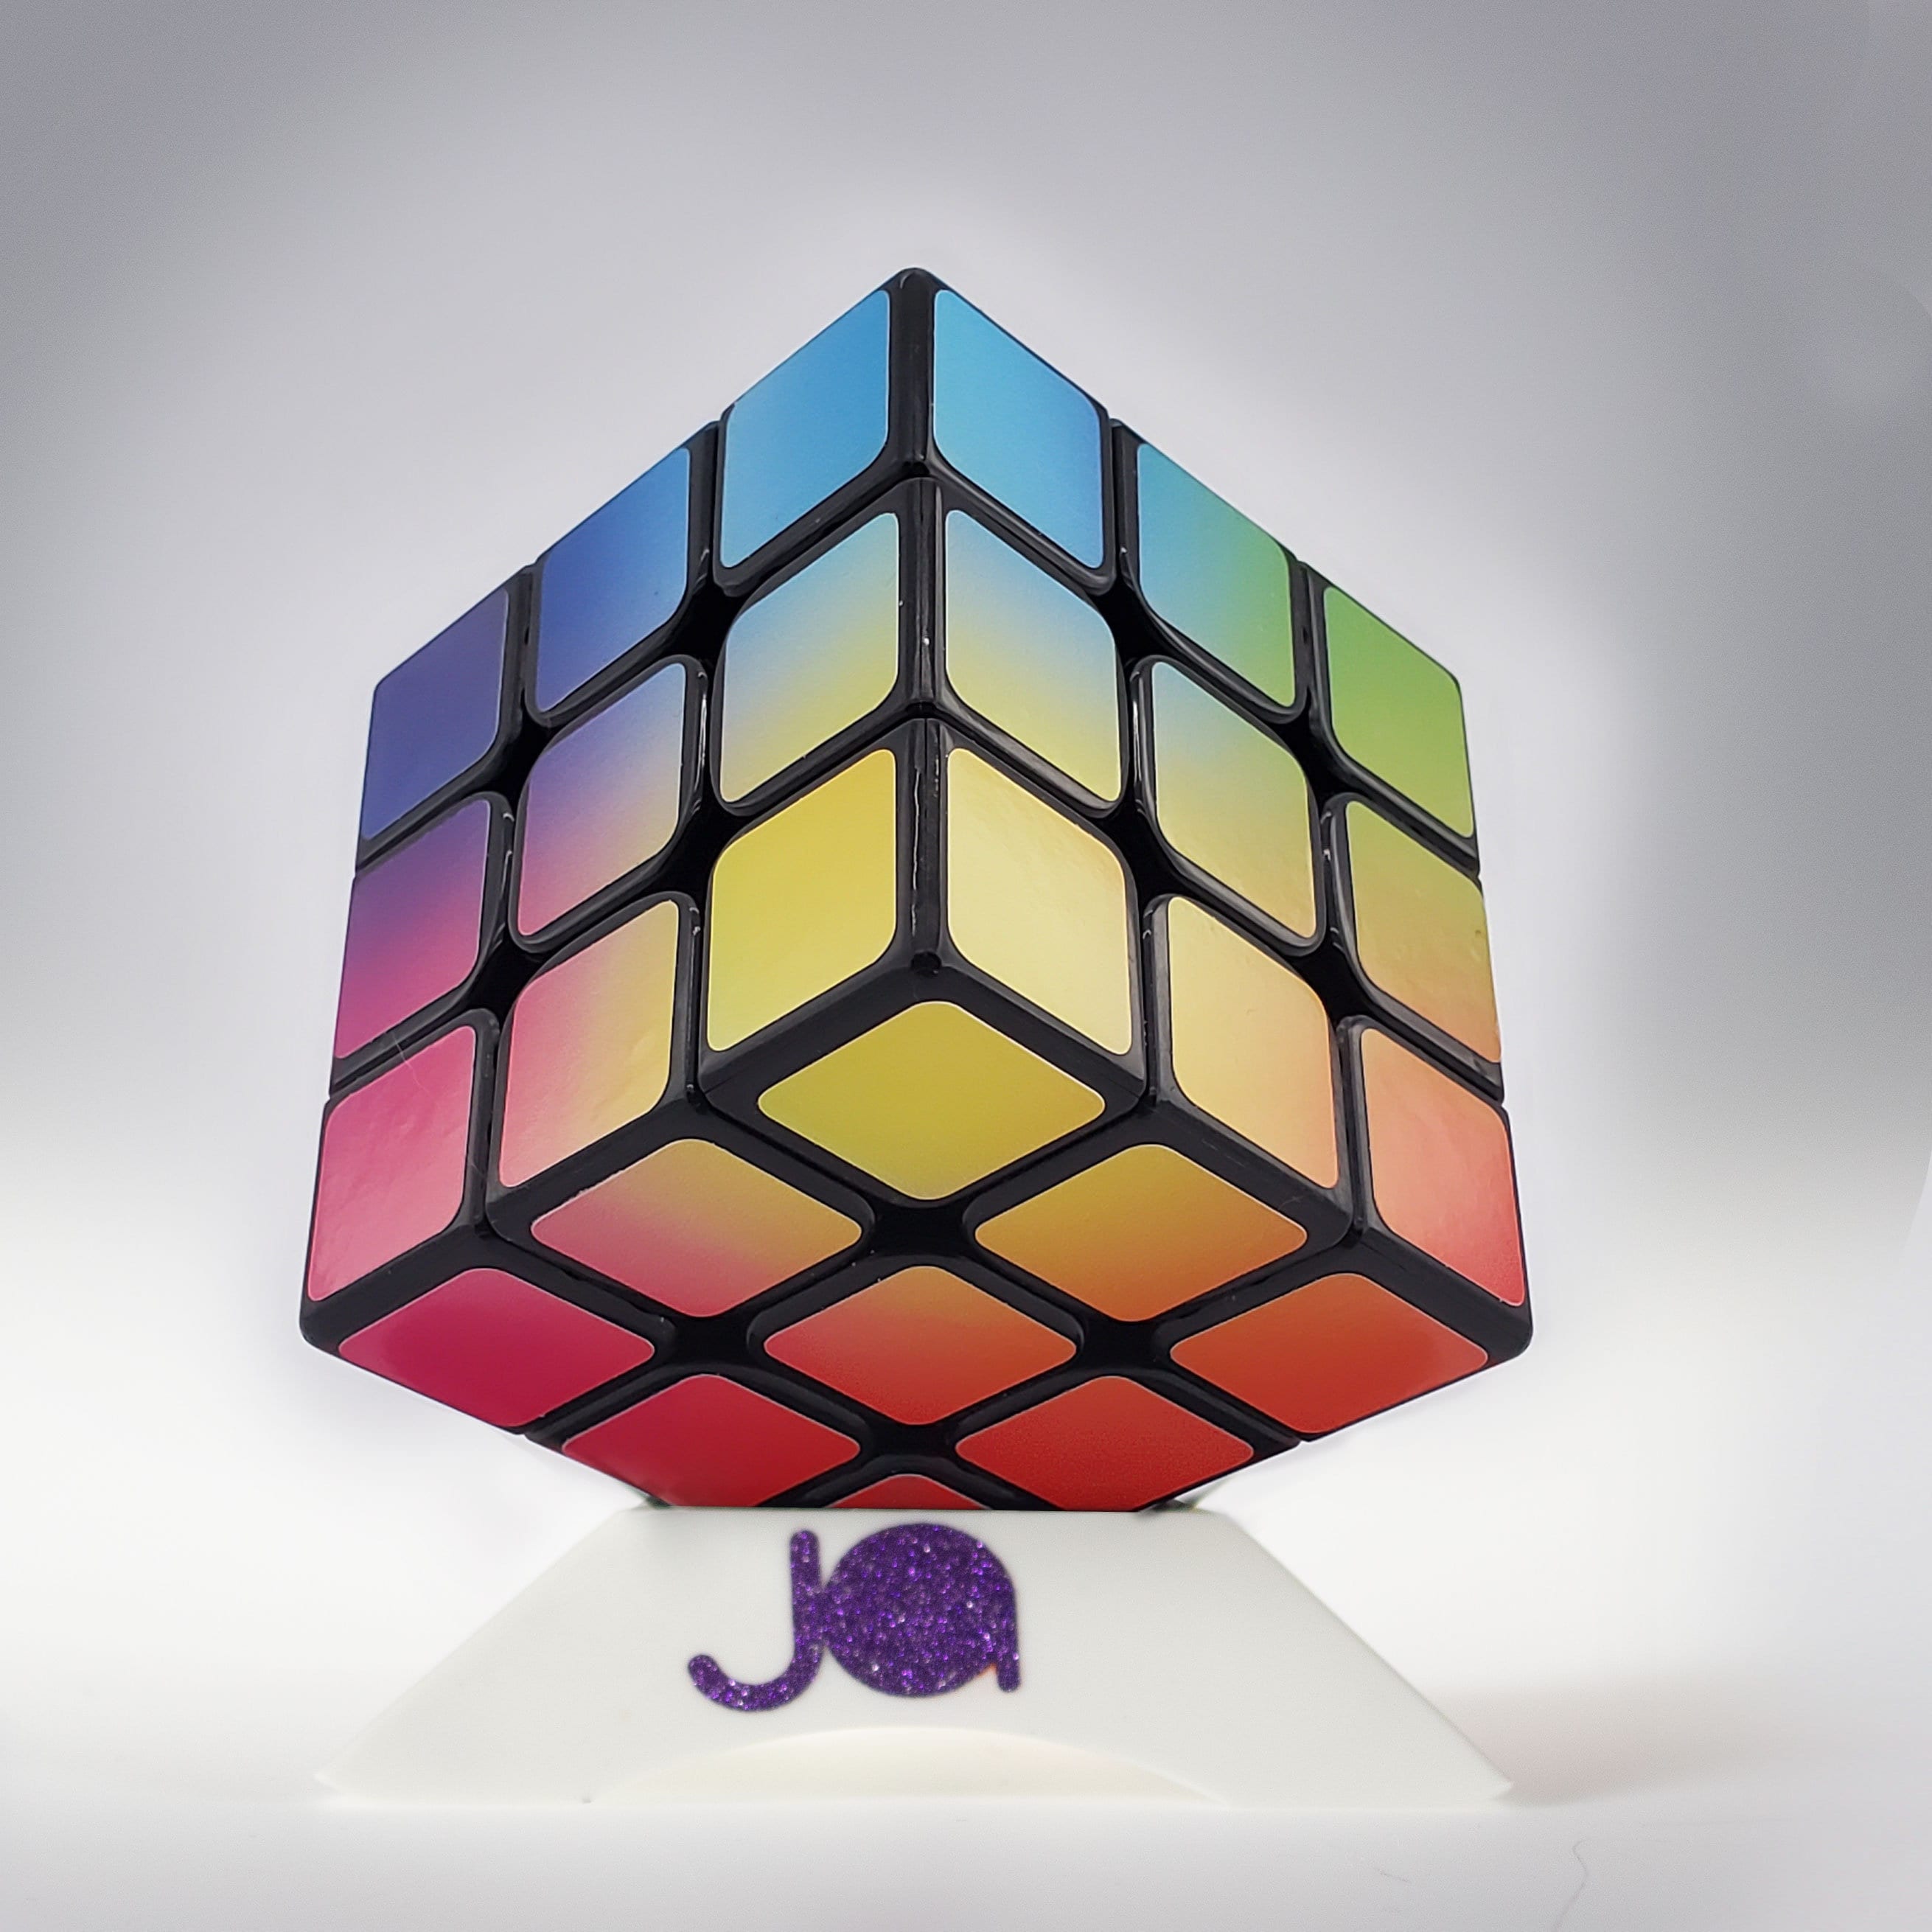  Rubik's Cube, 3x3 Magnetic Speed Cube, Faster Than Ever  Problem-Solving Cube : Clothing, Shoes & Jewelry